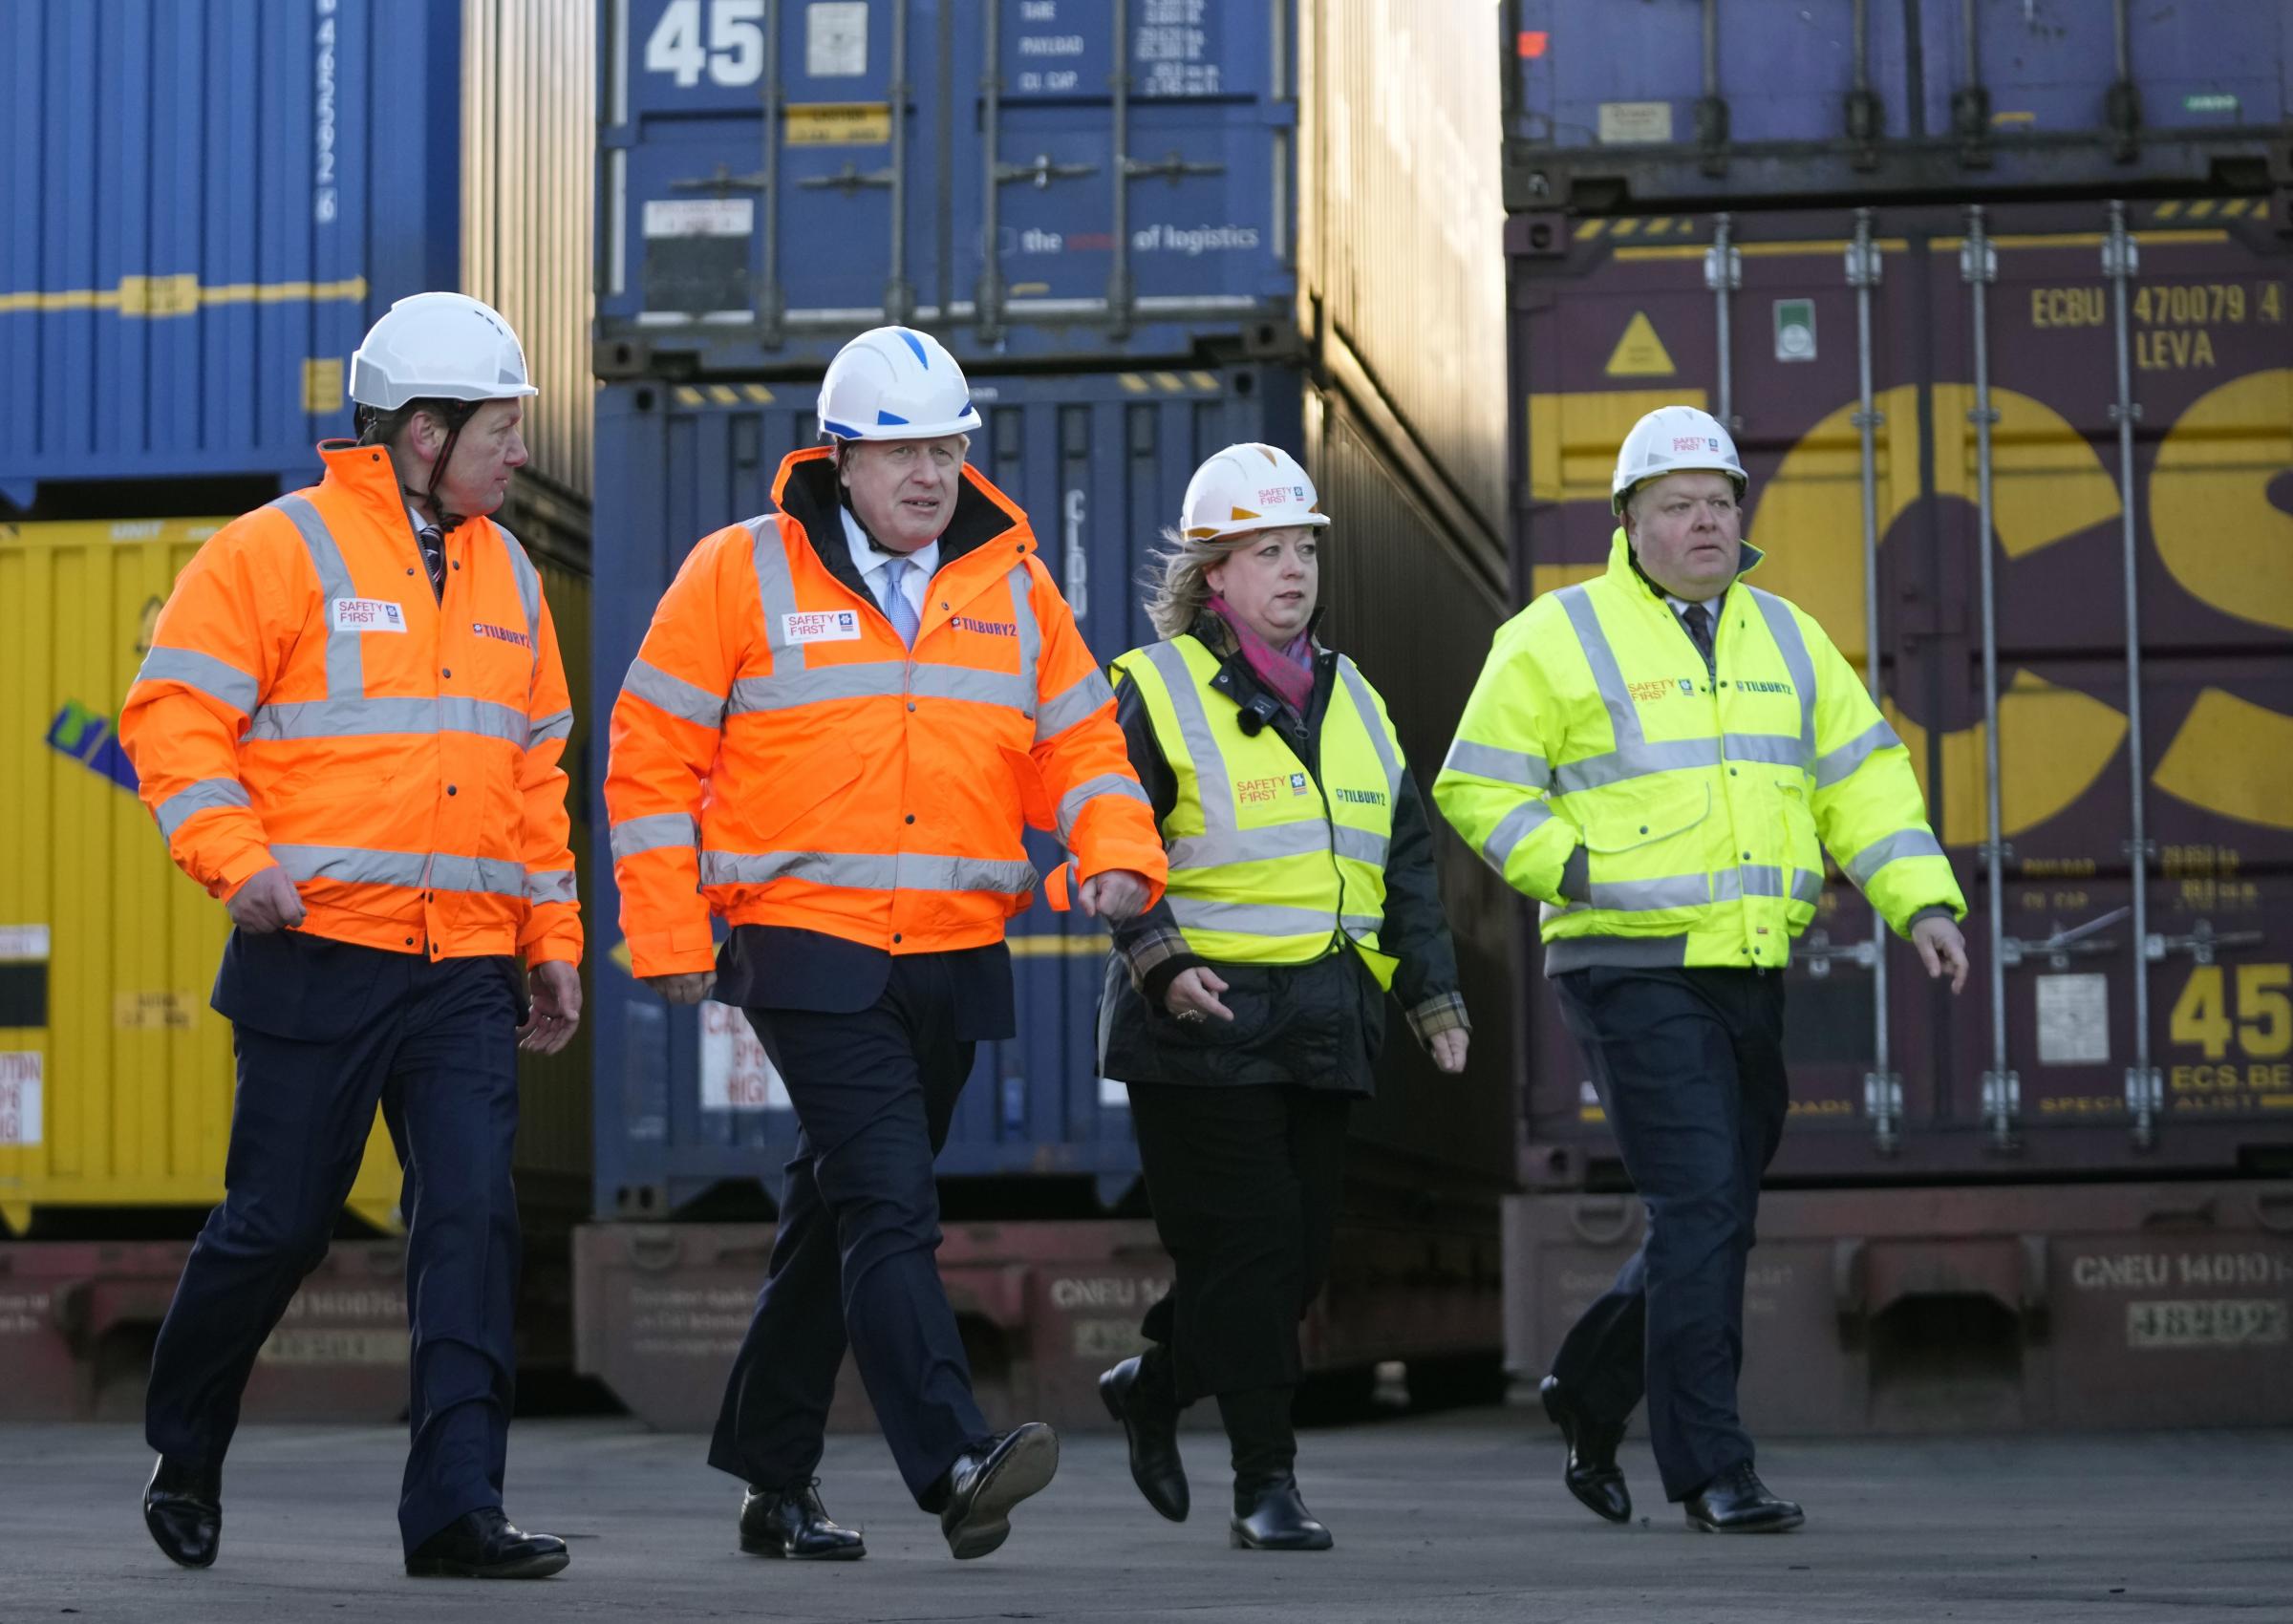 Prime Minister Boris Johnson (second left) walks with (from left) Charles Hammond, Group CEO Forth Ports, MP Jackie Doyle Price and Paul Dale, Asset Site Director of the Port of Tilbury during a visit to Tilbury Docks in Essex. Picture date: Monday